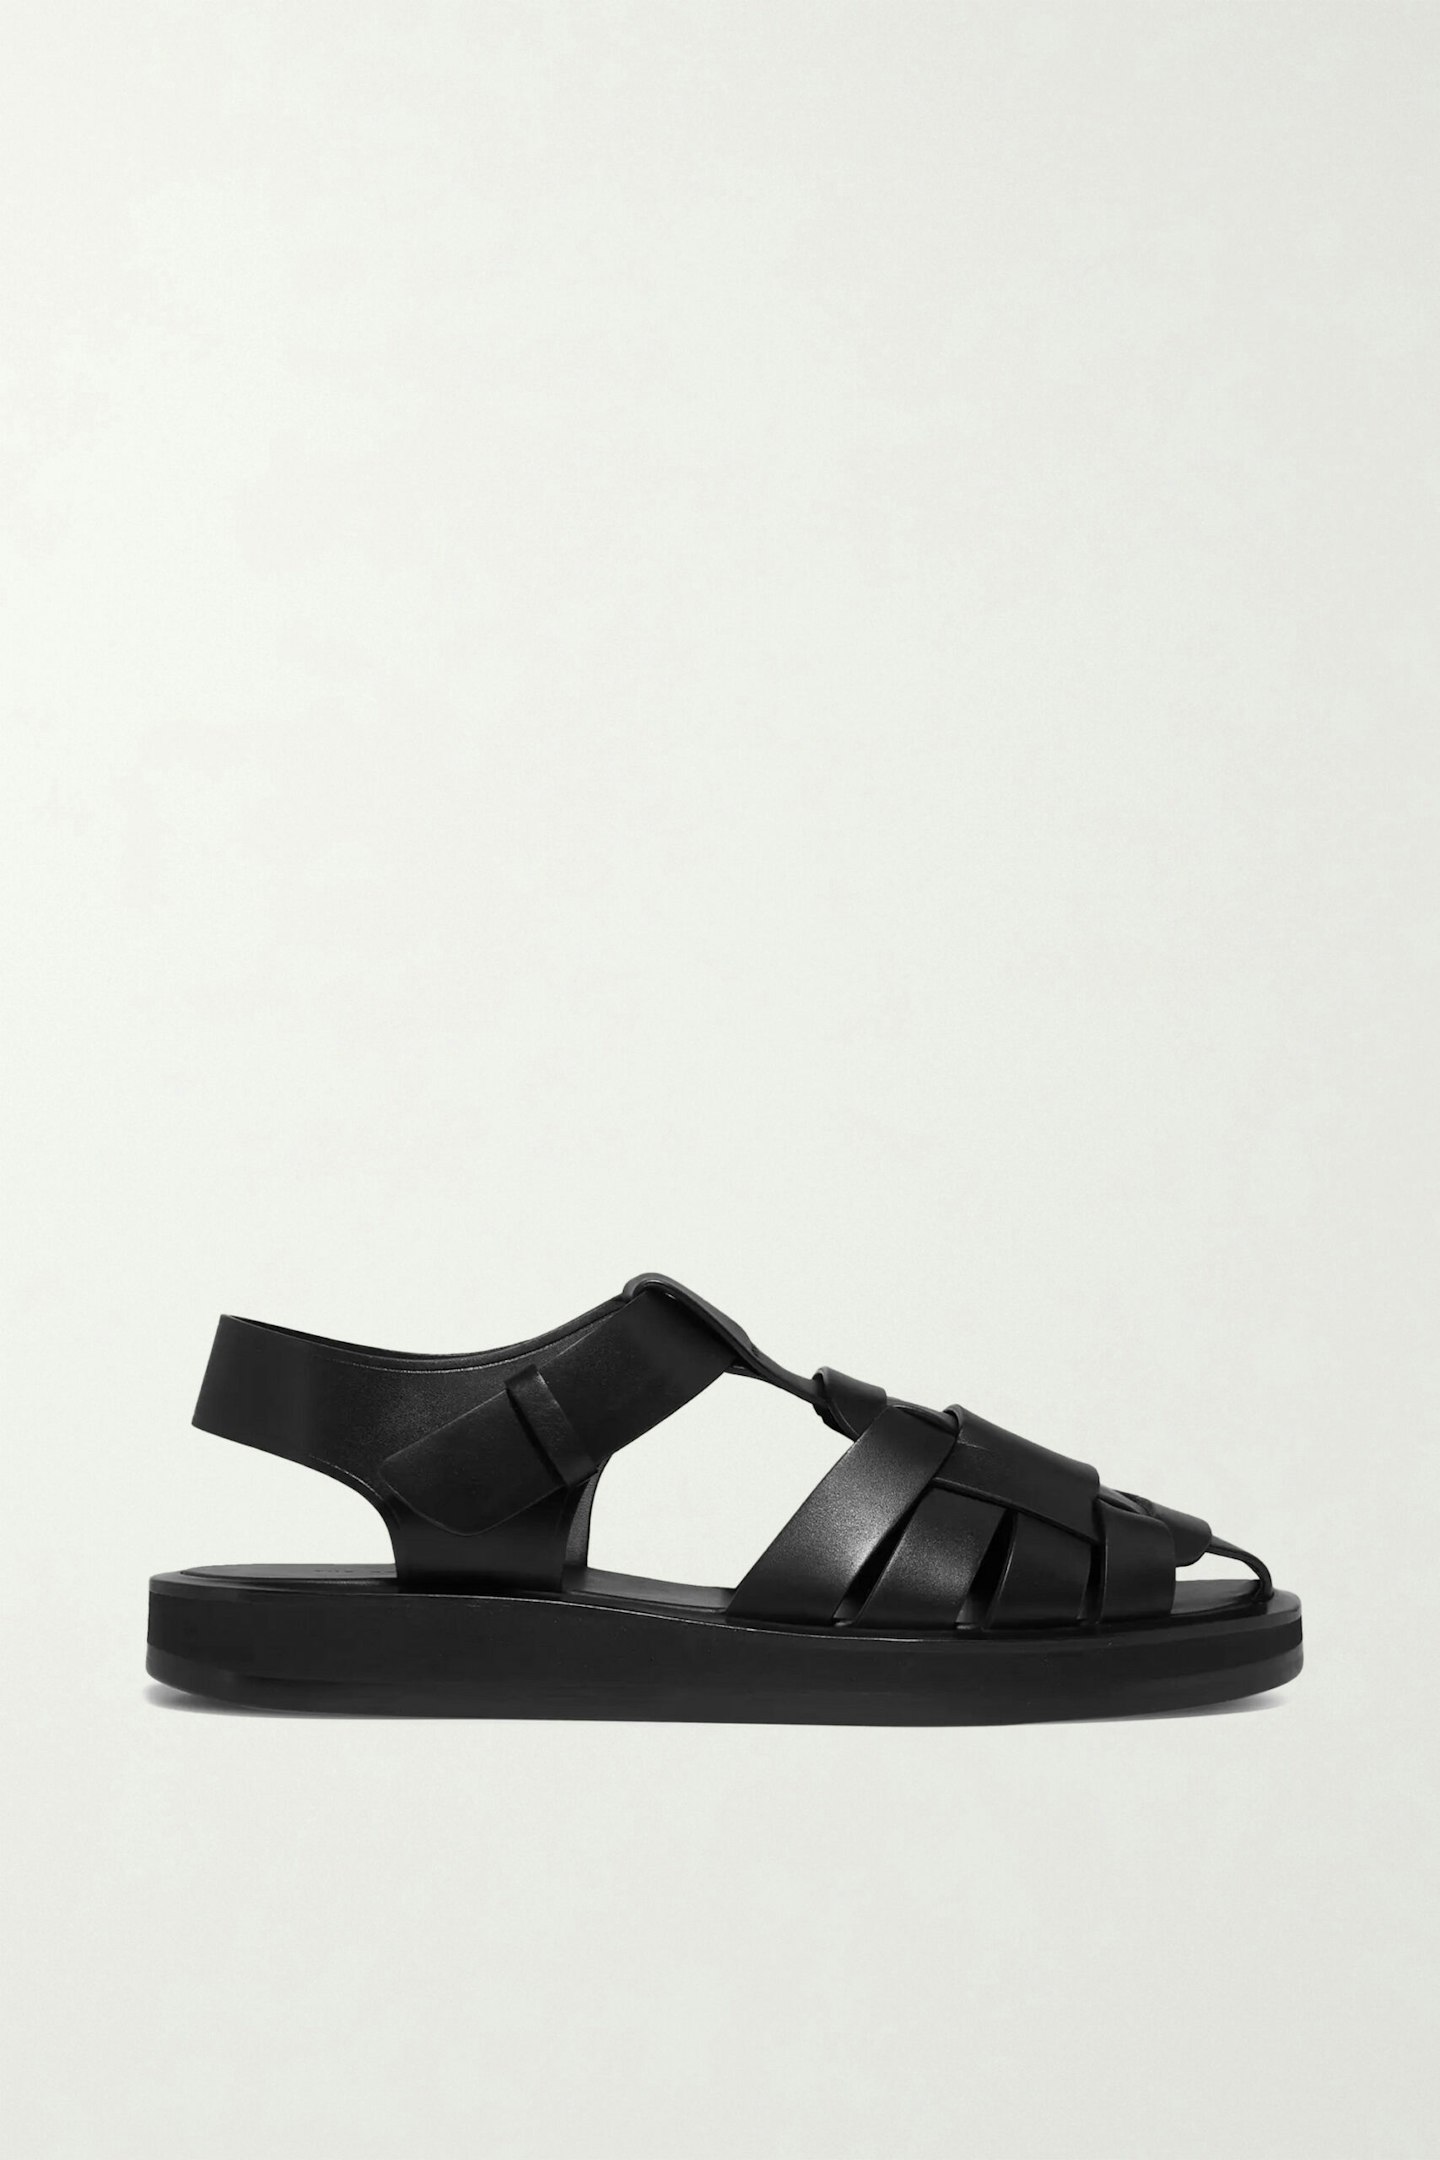 The Row, Fisherman Woven Textured-Leather Sandals